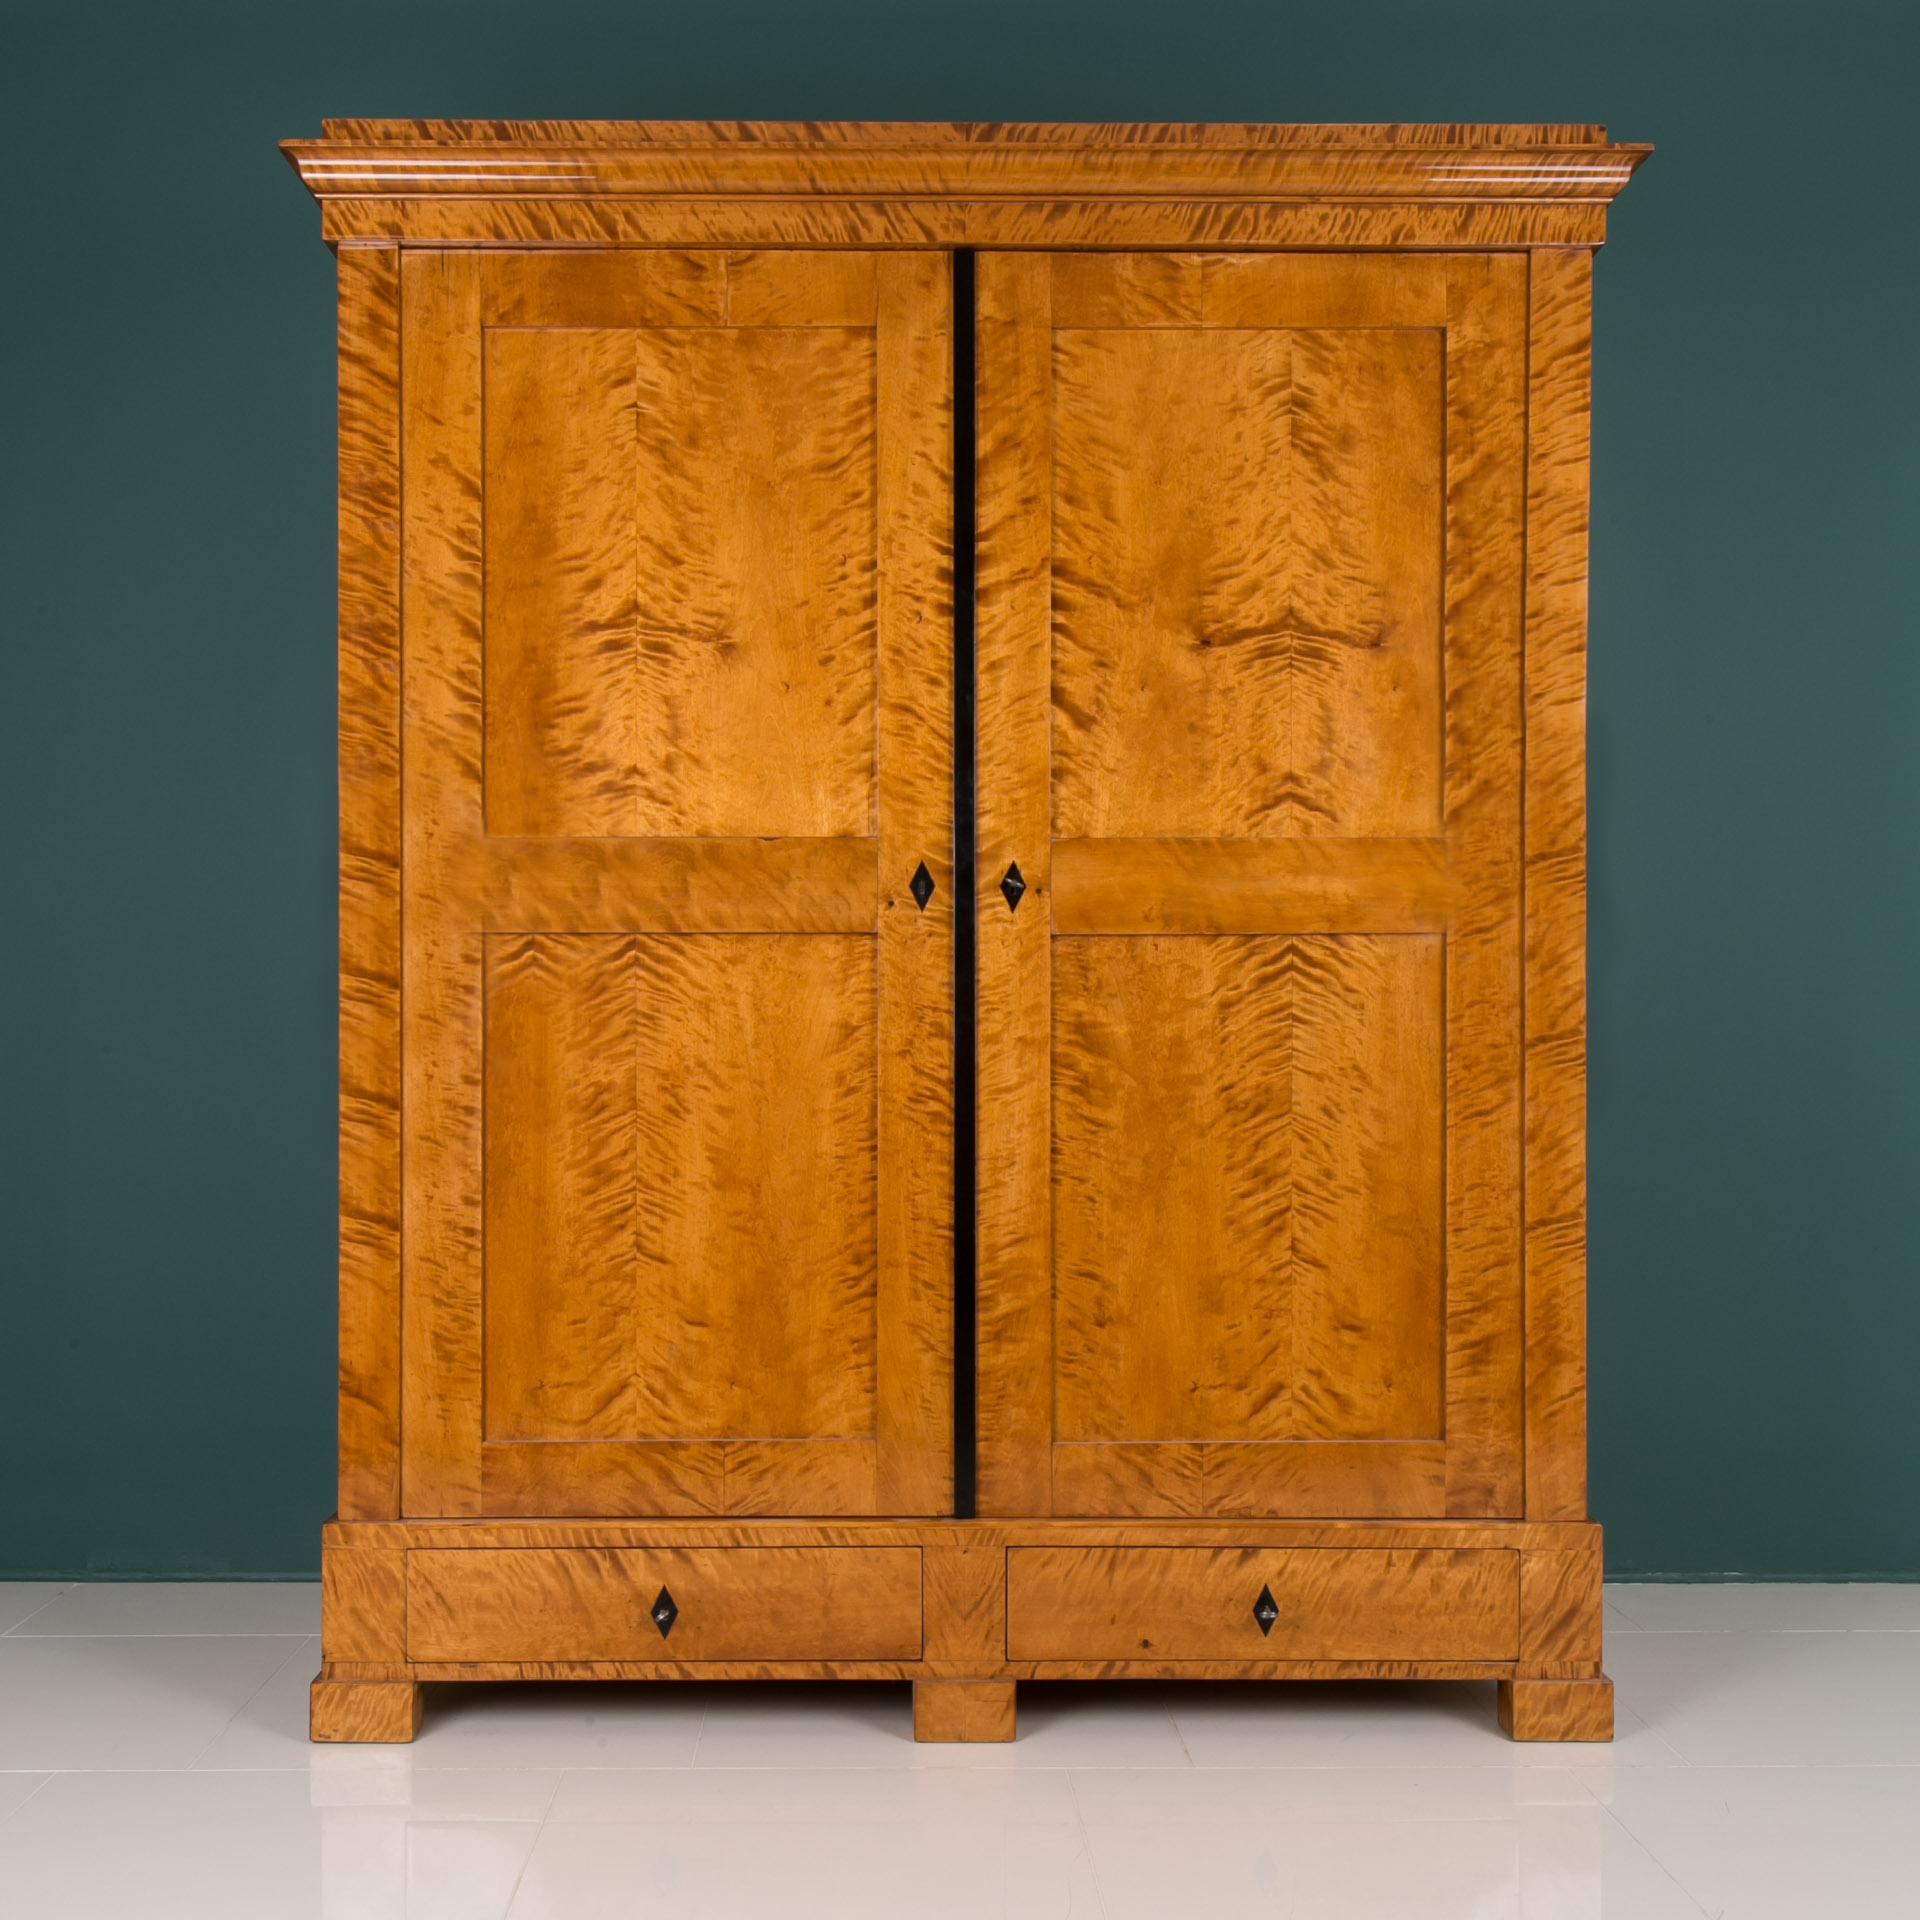 This Biedermeier wardrobe was made in Germany in first half of the 19th century. The piece is veneered with beautiful and rare flame birch veneer. Flame birch is known to show its beauty in various lighting that allows to show exquisite shades and